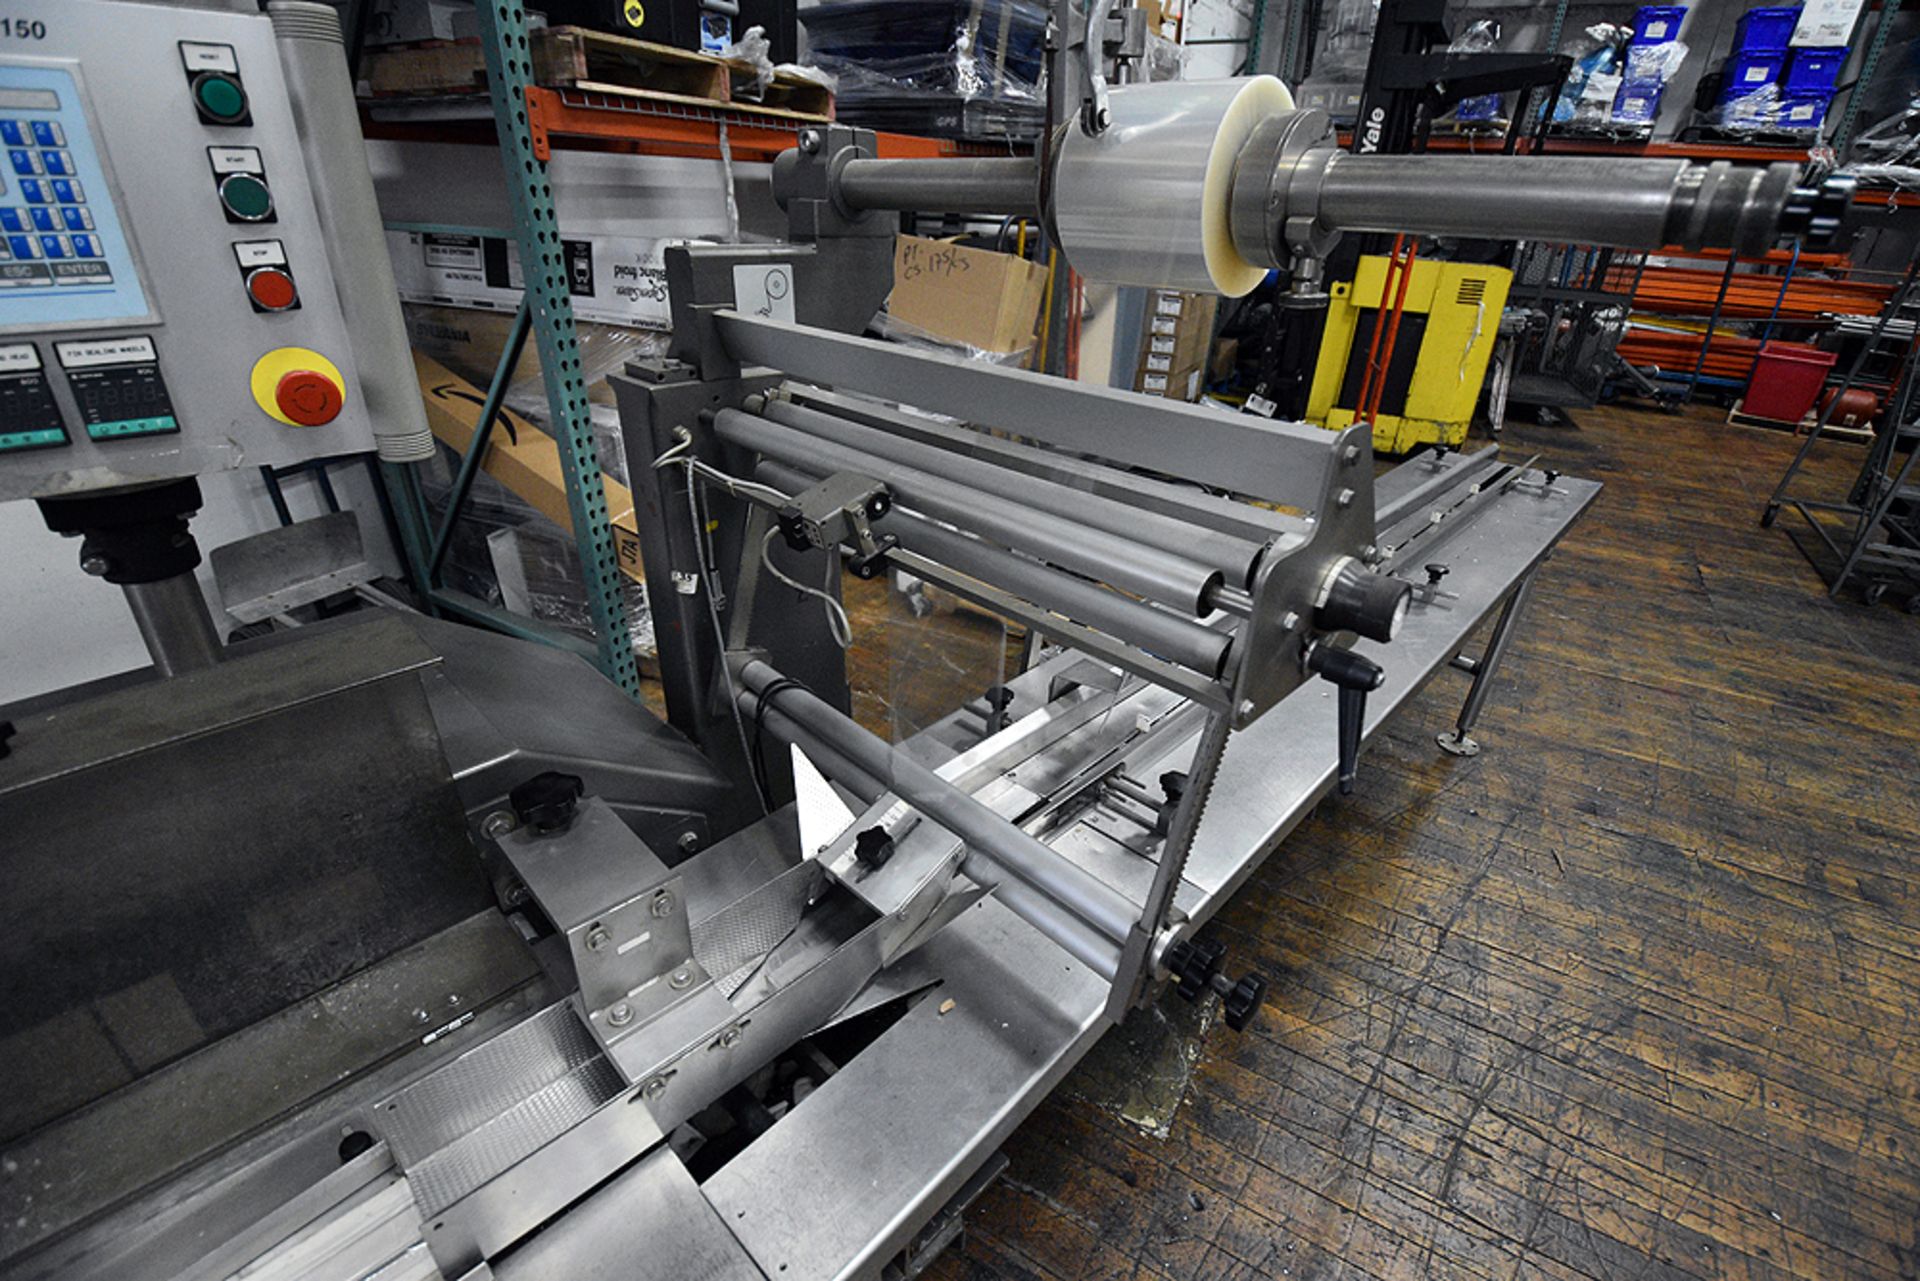 Sasib WE-150 Multi-Axis Horizontal Flo-Wrapper Line w/Attachments (See Pictures for Reference) - Image 6 of 20